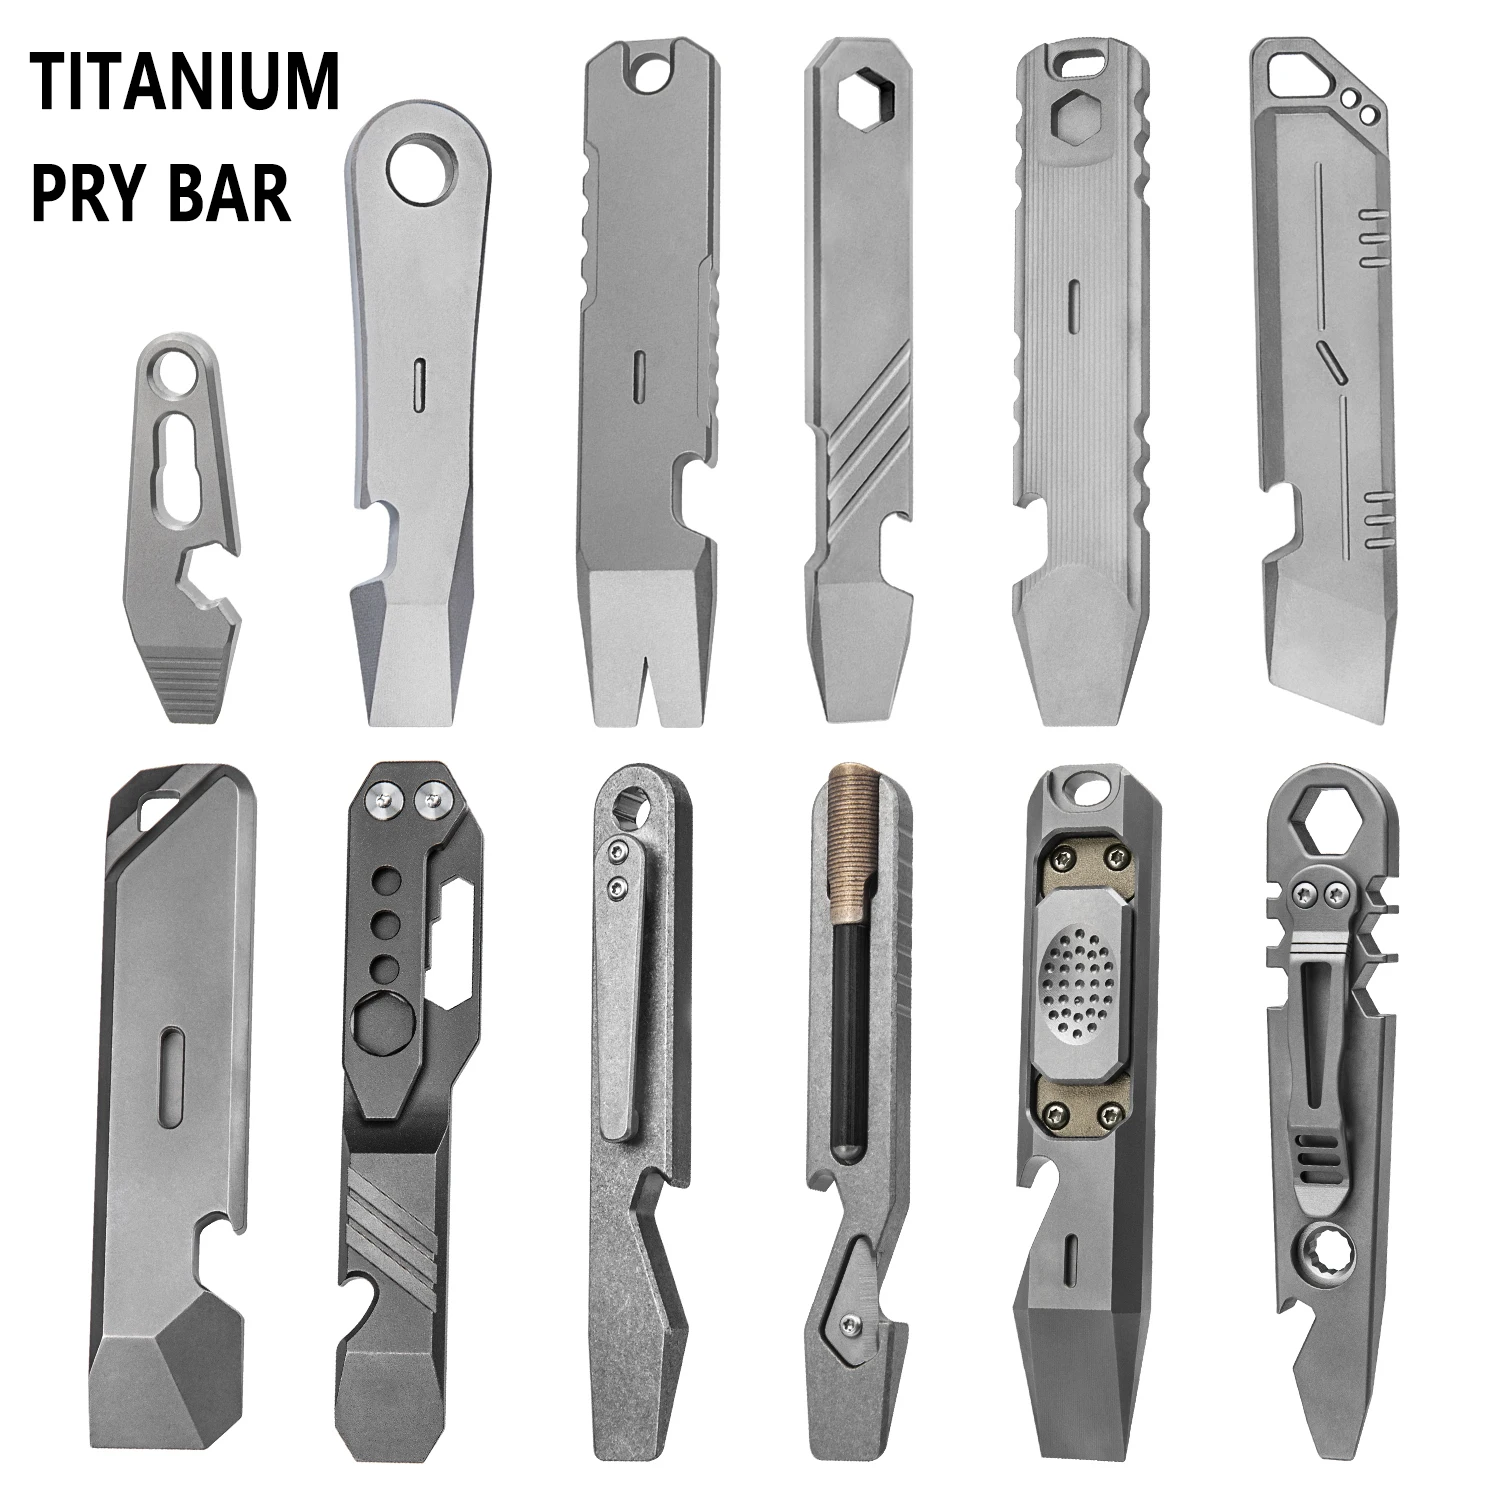 Titanium Alloy Pry Bar Bottle Opener Screwdriver EDC Multifunctional Tool Carry It With You Outdoors